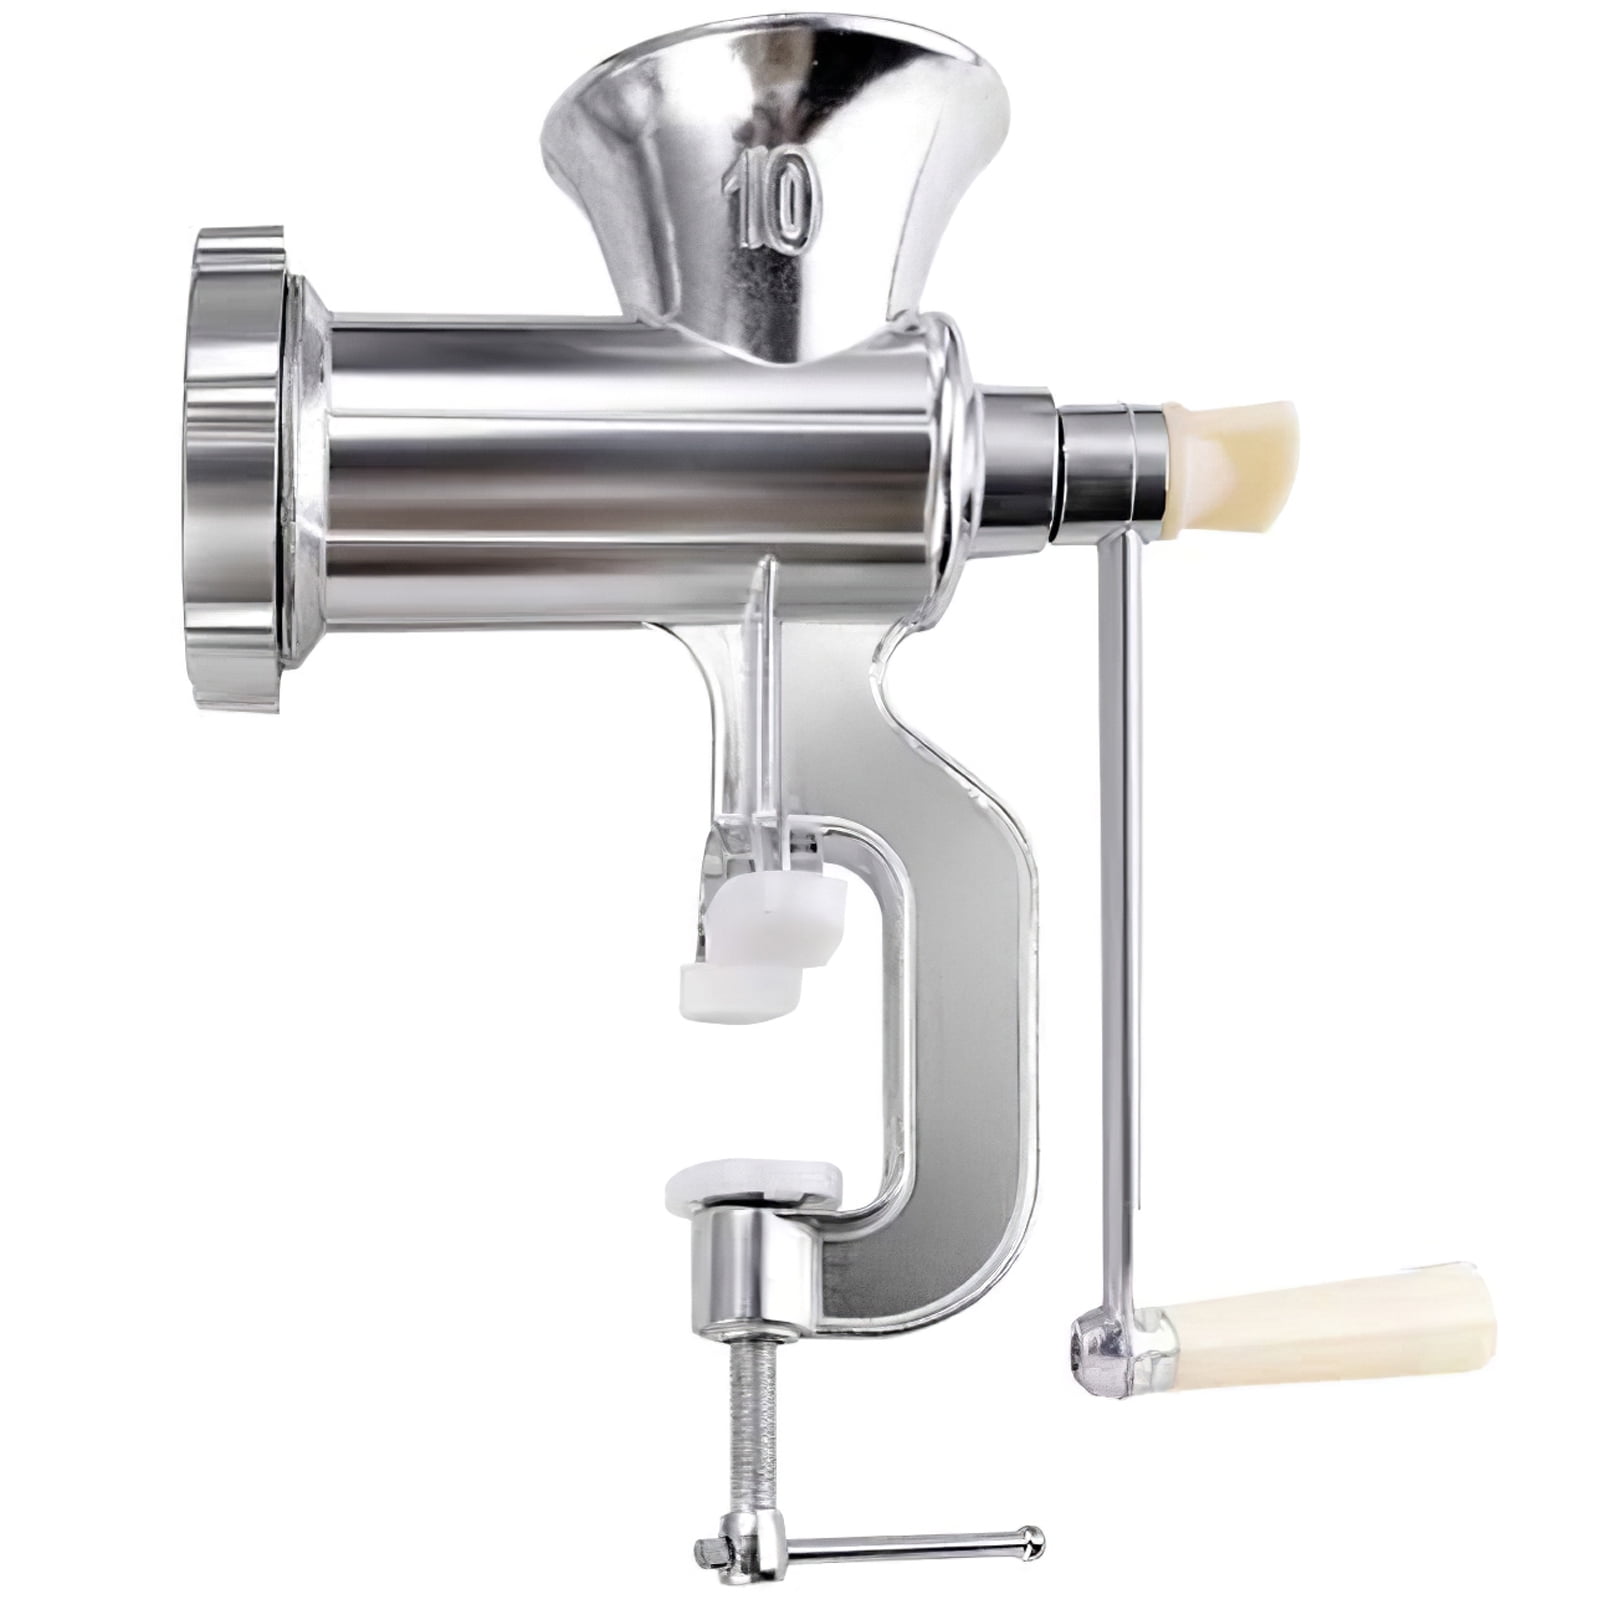  Manual Meat Mincers, Aluminum Alloy Heavy Duty Meat Grinder  with Stuffer Tubes Hand-Operated Grinding Machine for Mincing Grinding Meats  Pork Beef Noodles Pepper Sausage Cookies#5: Home & Kitchen